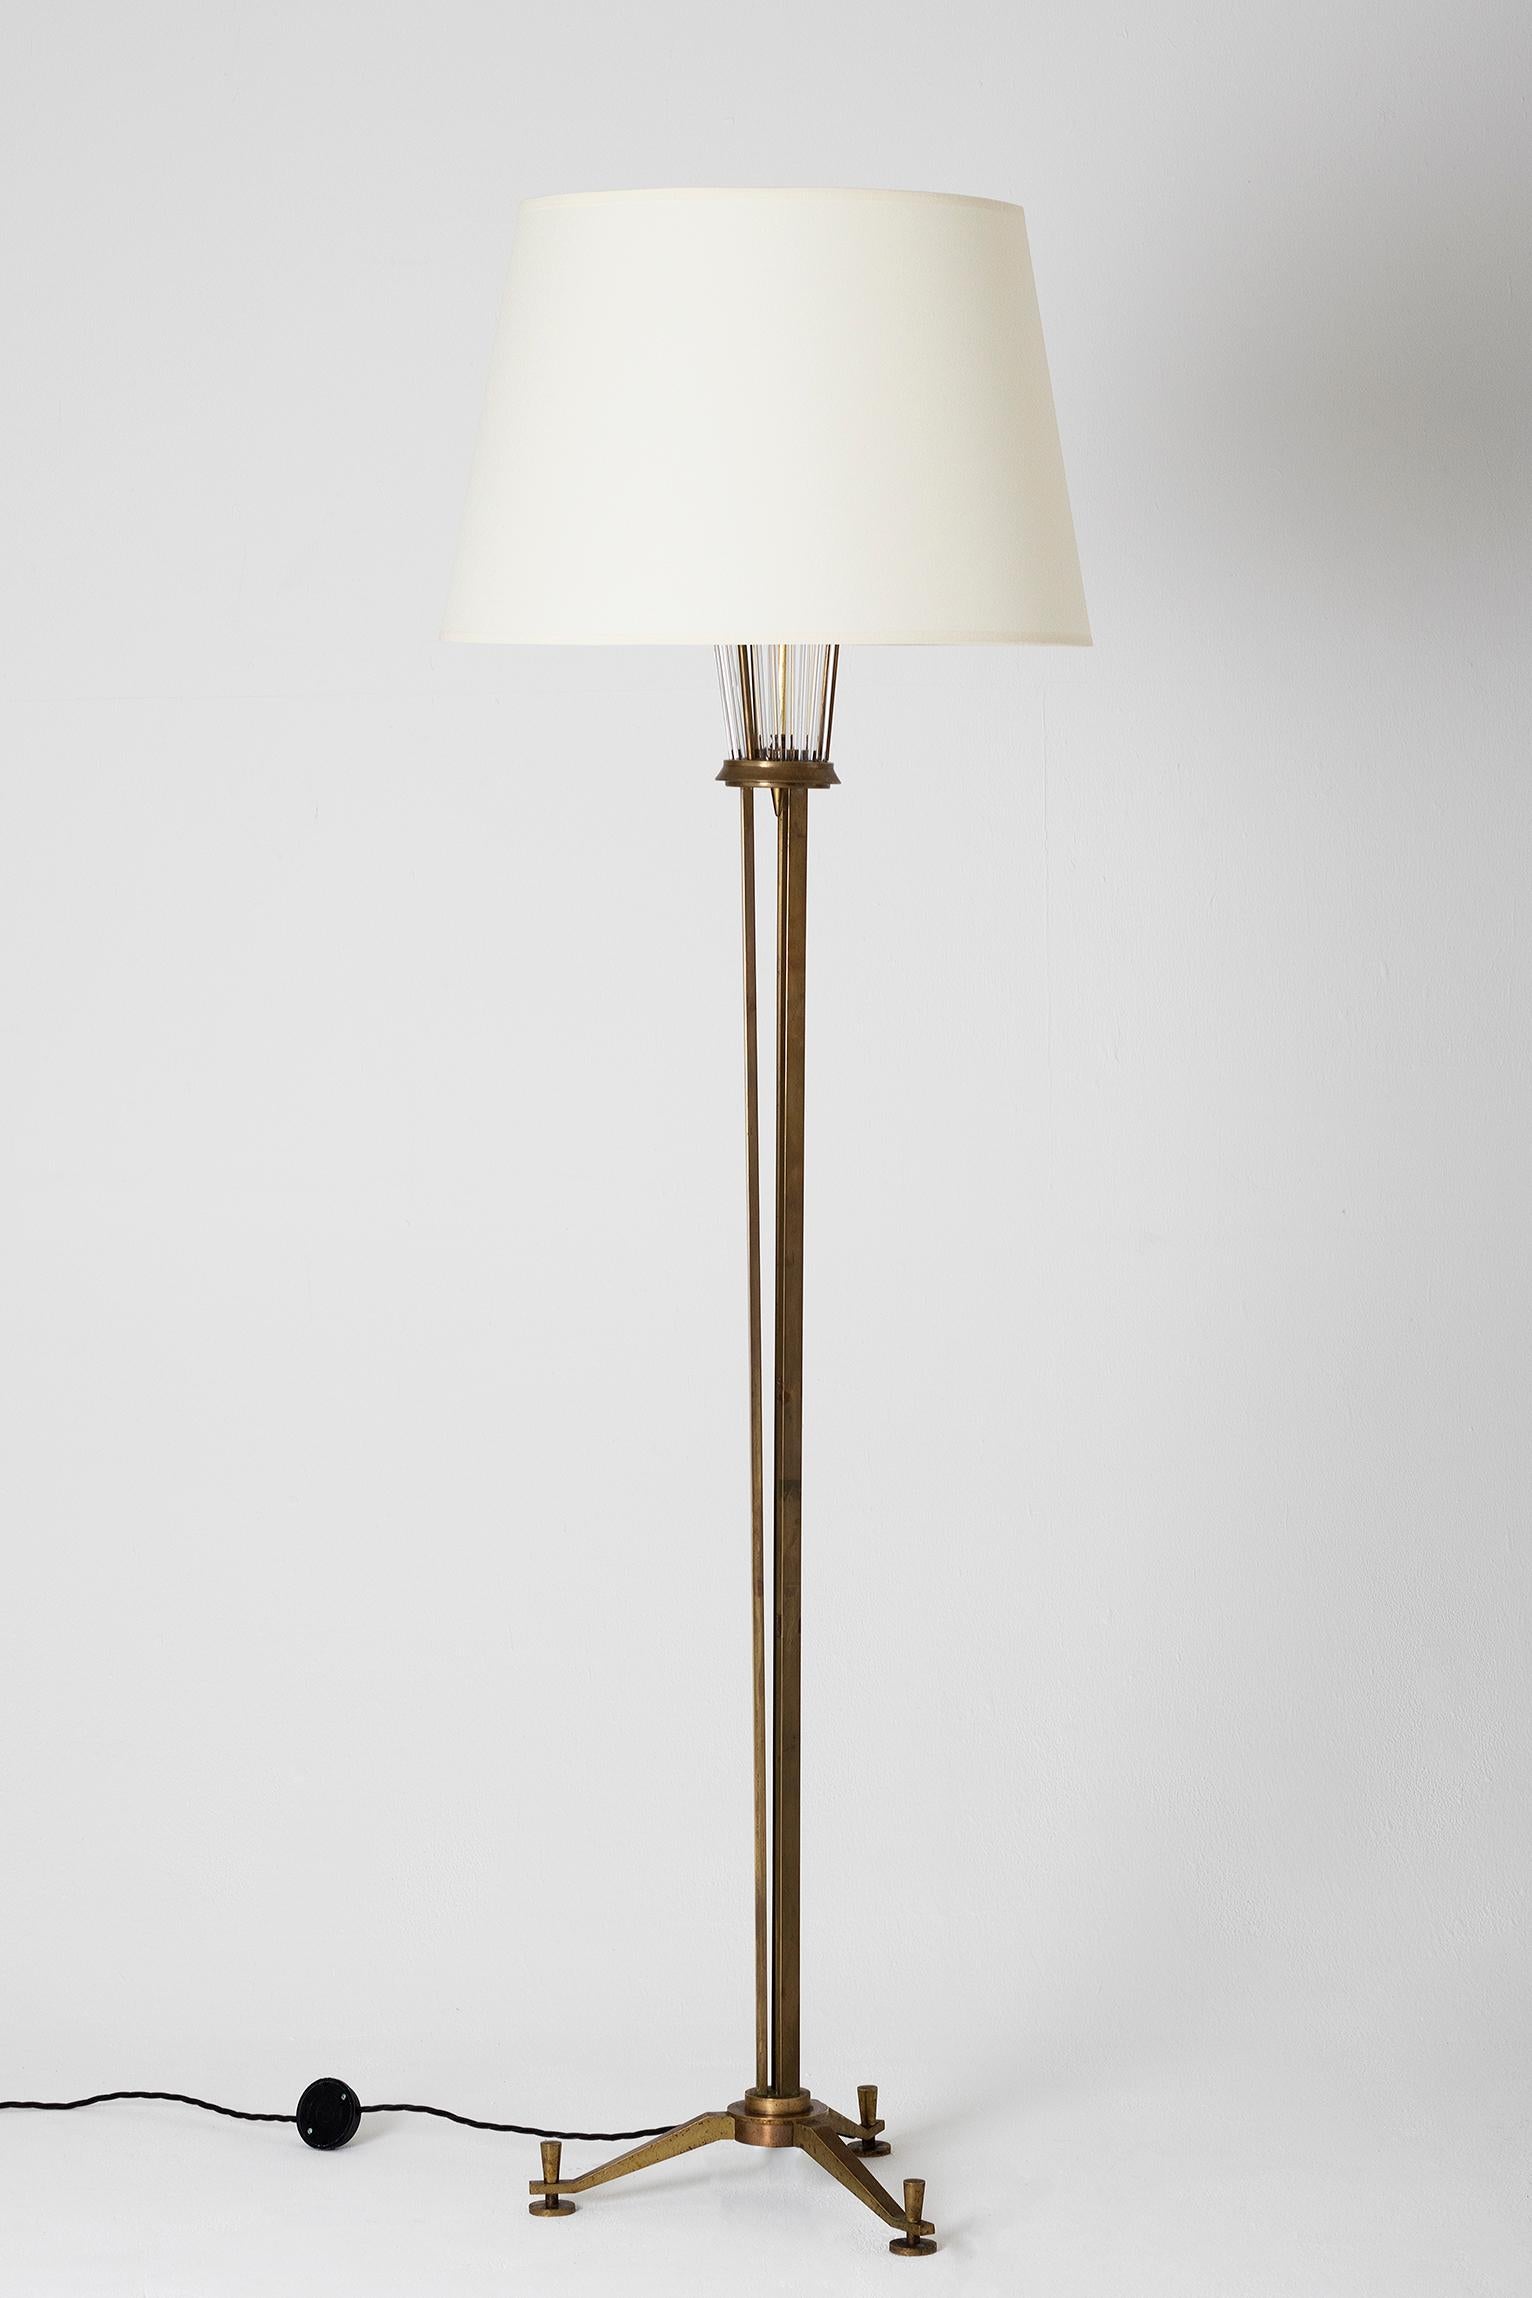 A brass and glass rods floor lamp, by Henri Petitot for Atelier Petitot
France, Lyon, circa 1935
With the shade: 170 cm tall by 51 cm diameter
Lamp base only: 140 cm tall by 38 cm wide.